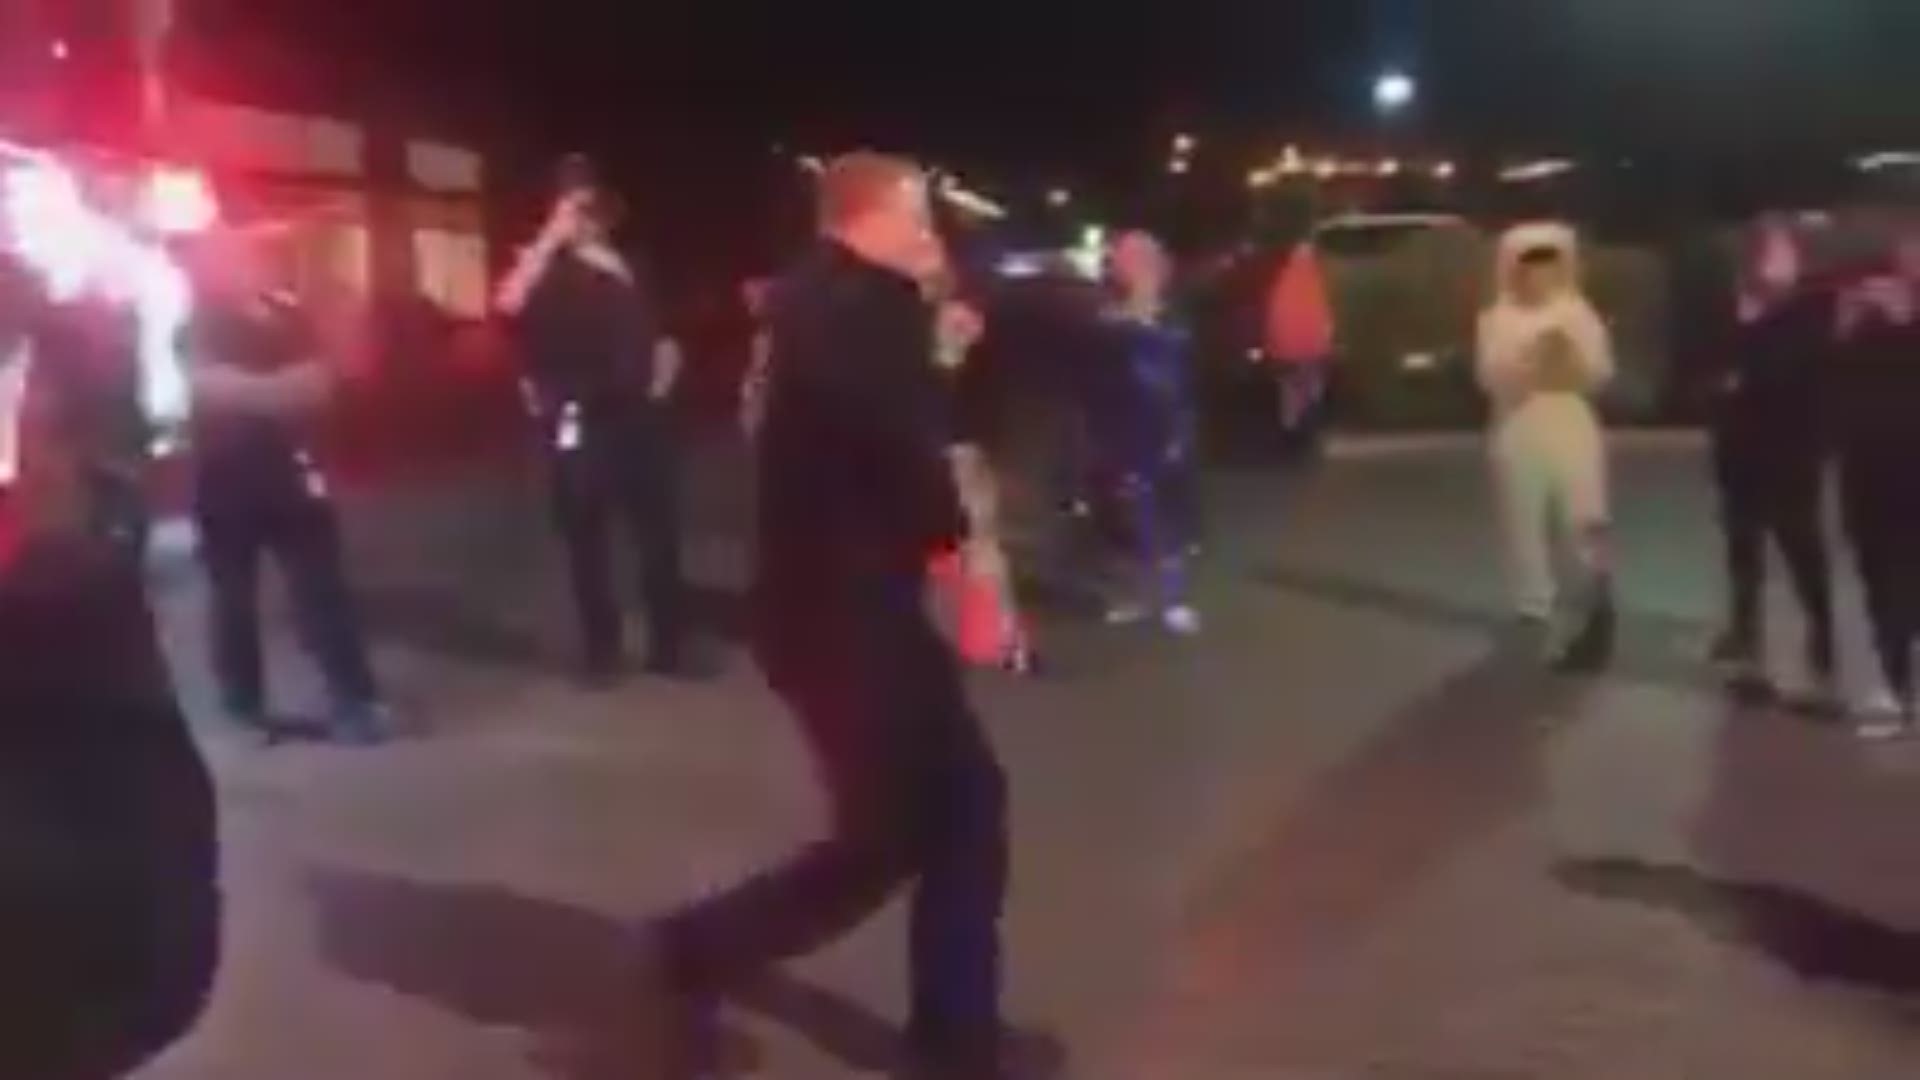 While working a Halloween event, a Celina firefighter decided to get jiggy and have a dance-off with a kid attending the festival in Celina, Texas.